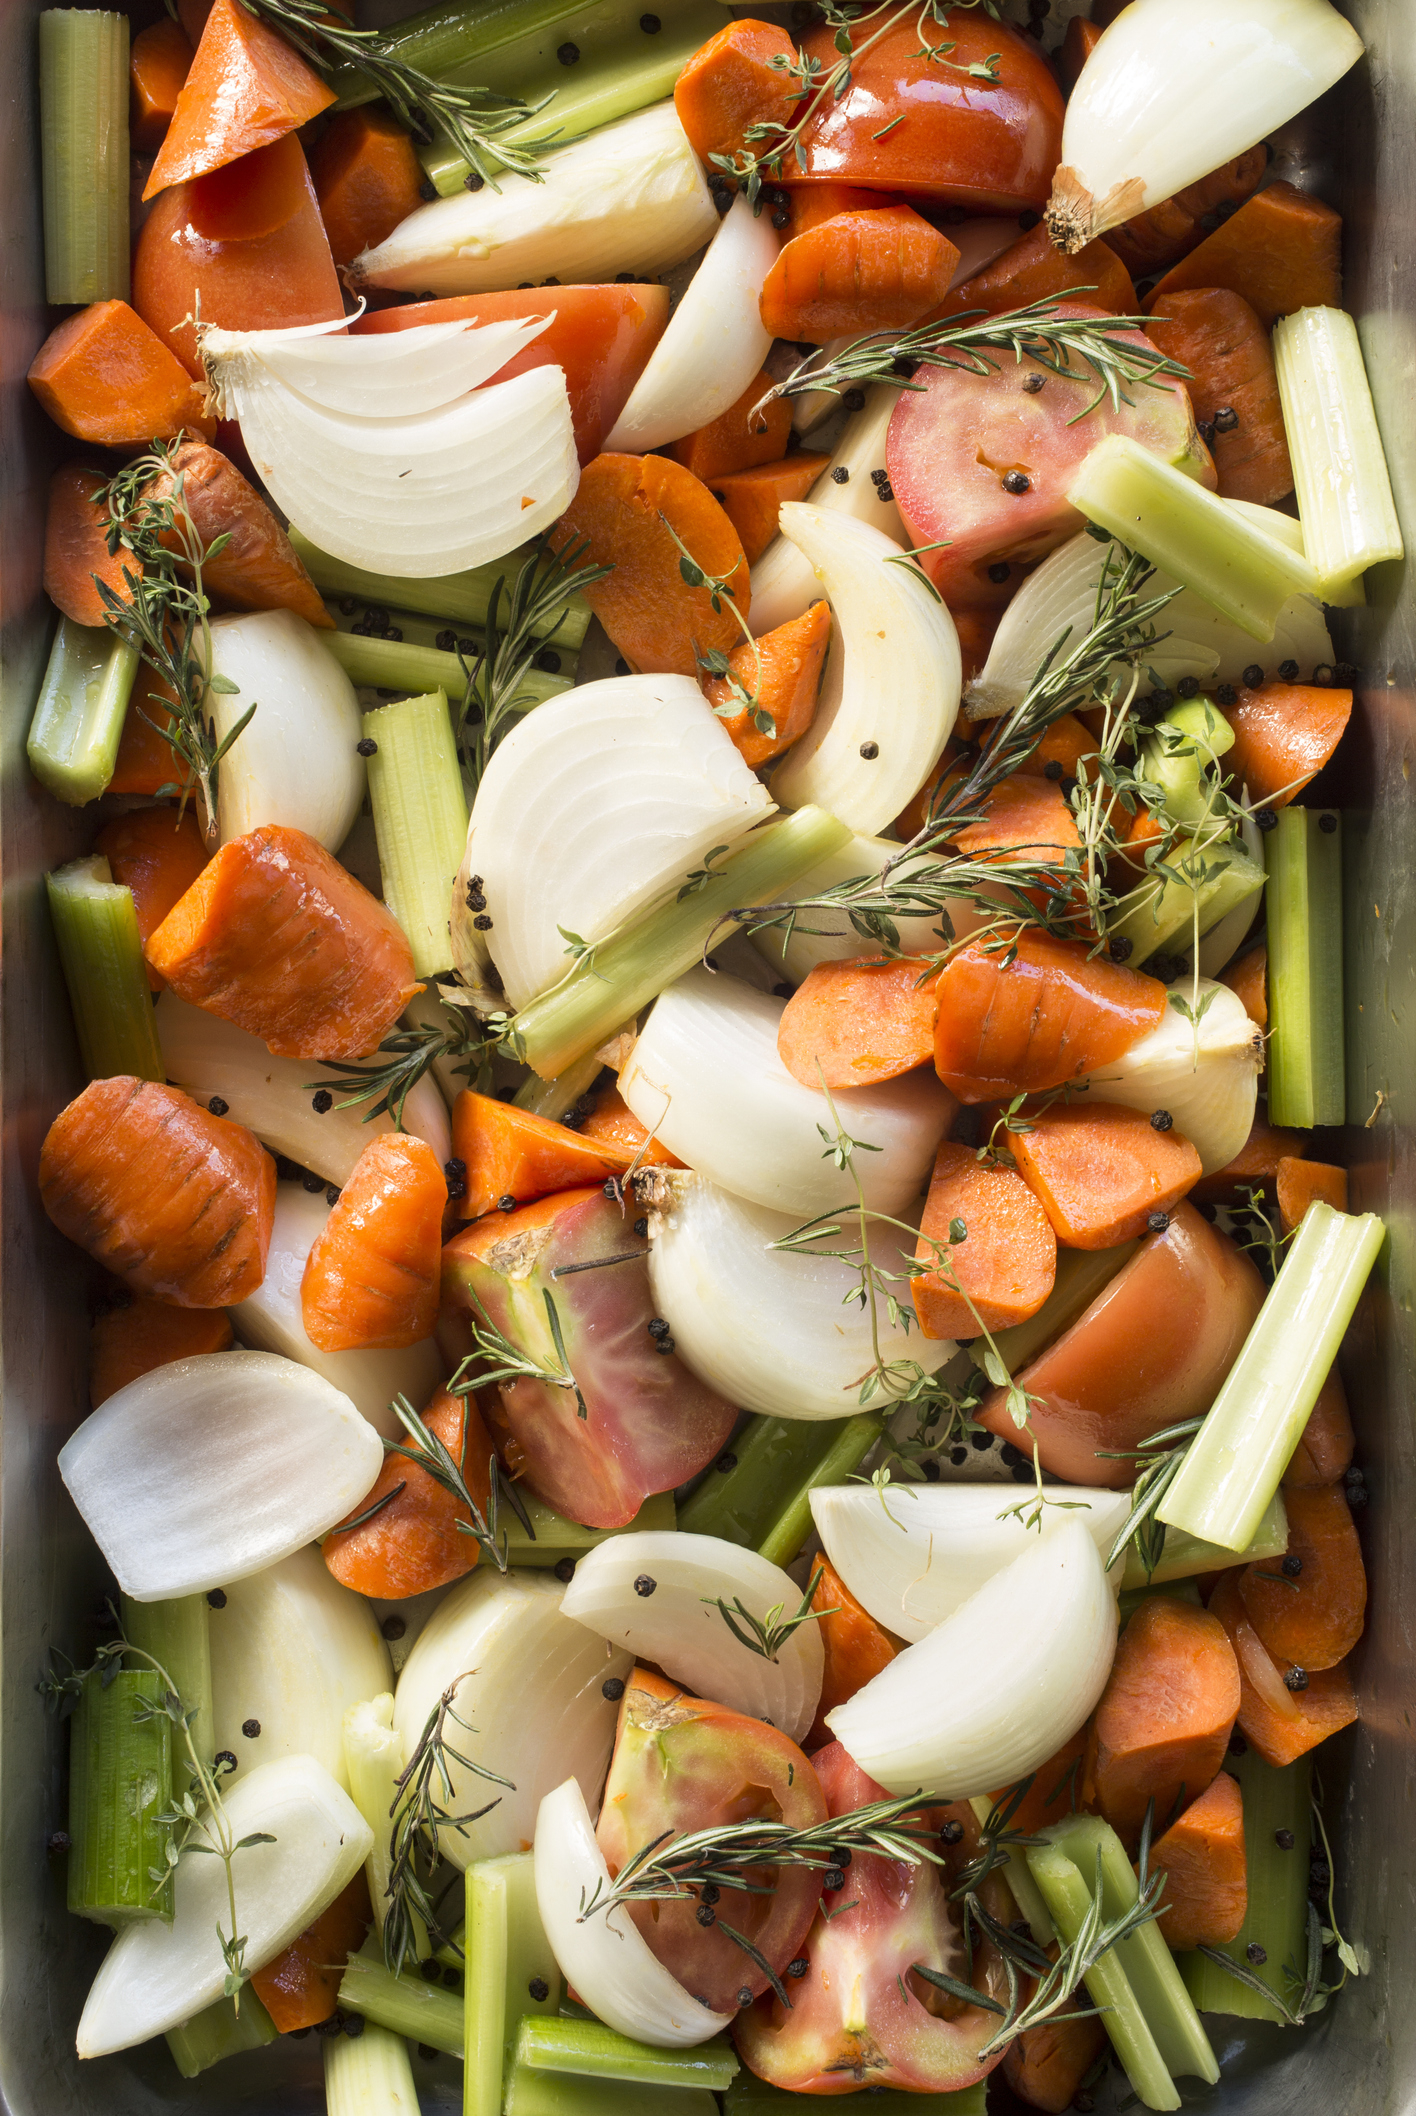 Assorted raw vegetables with herbs in a roasting pan, prepped for cooking